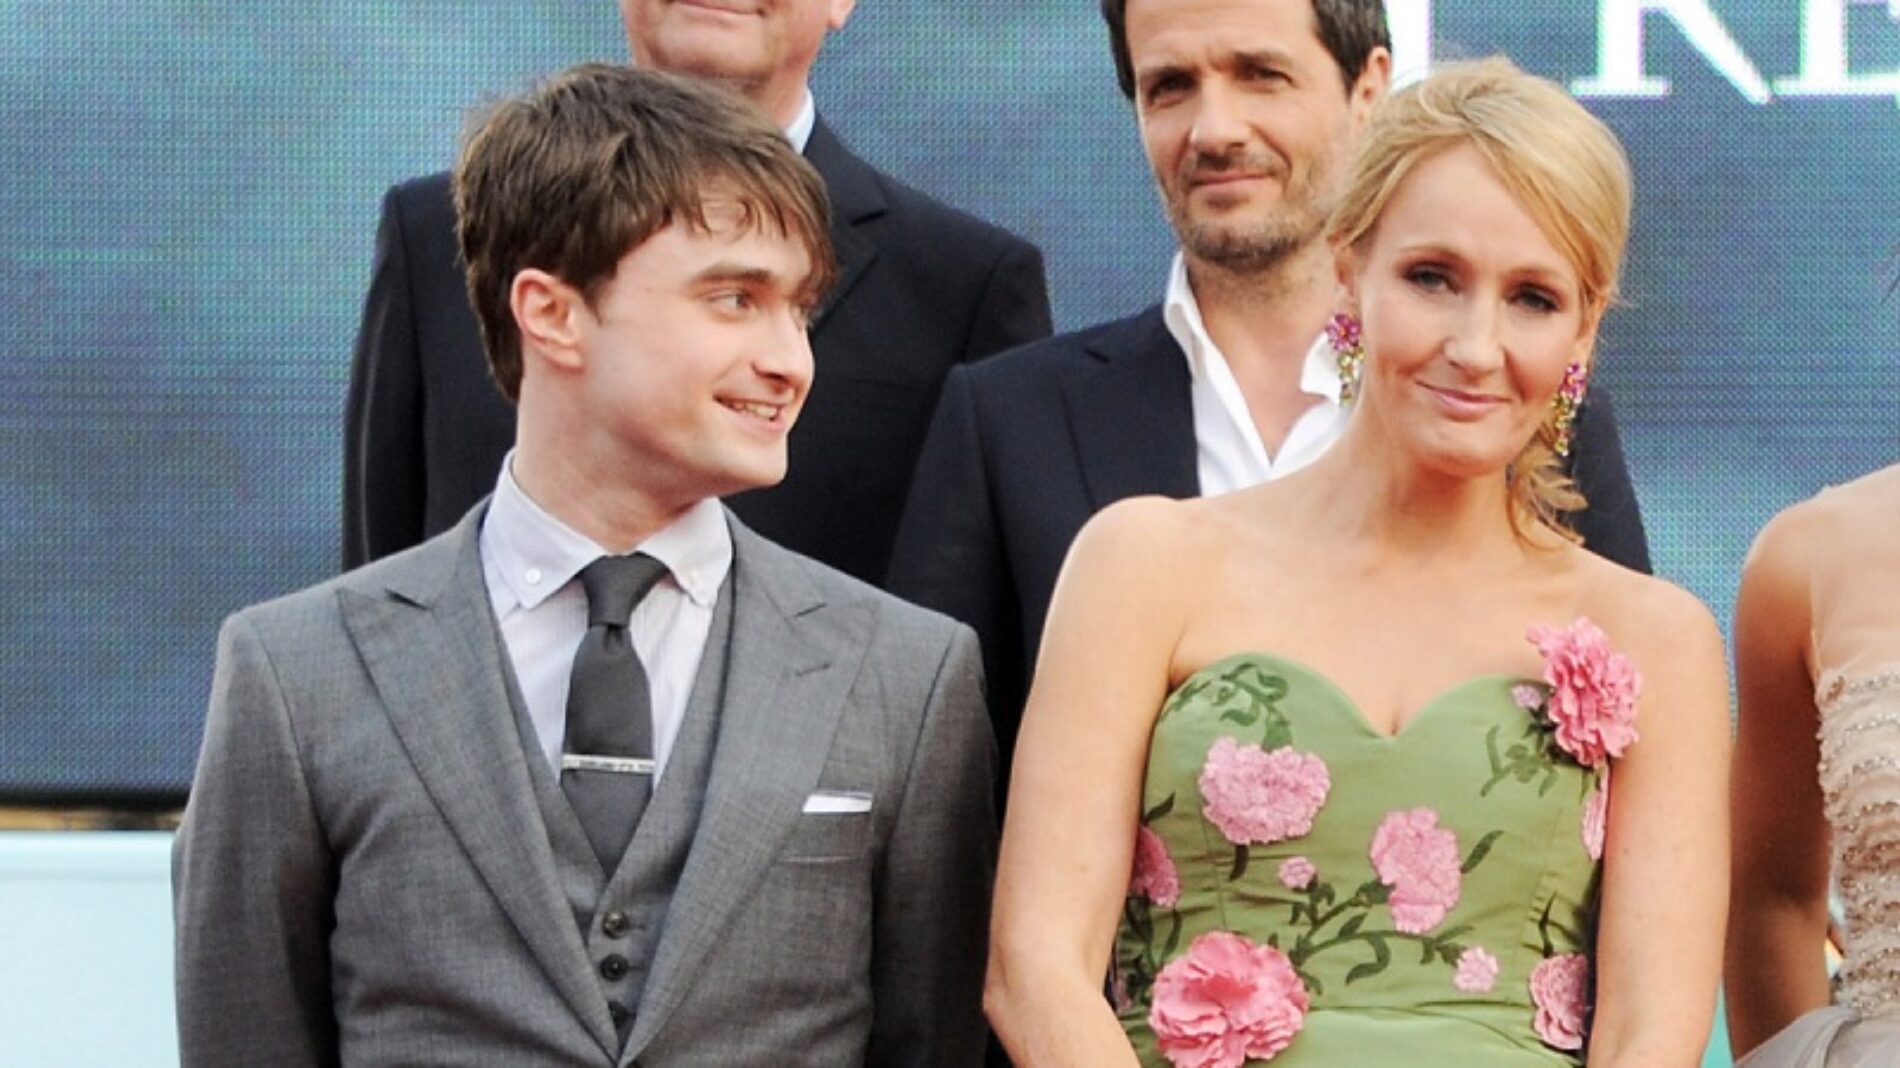 Daniel Radcliffe responds to JK Rowling’s “anti-trans” tweets as the #IStandWithJKRowling hashtag trends on Twitter